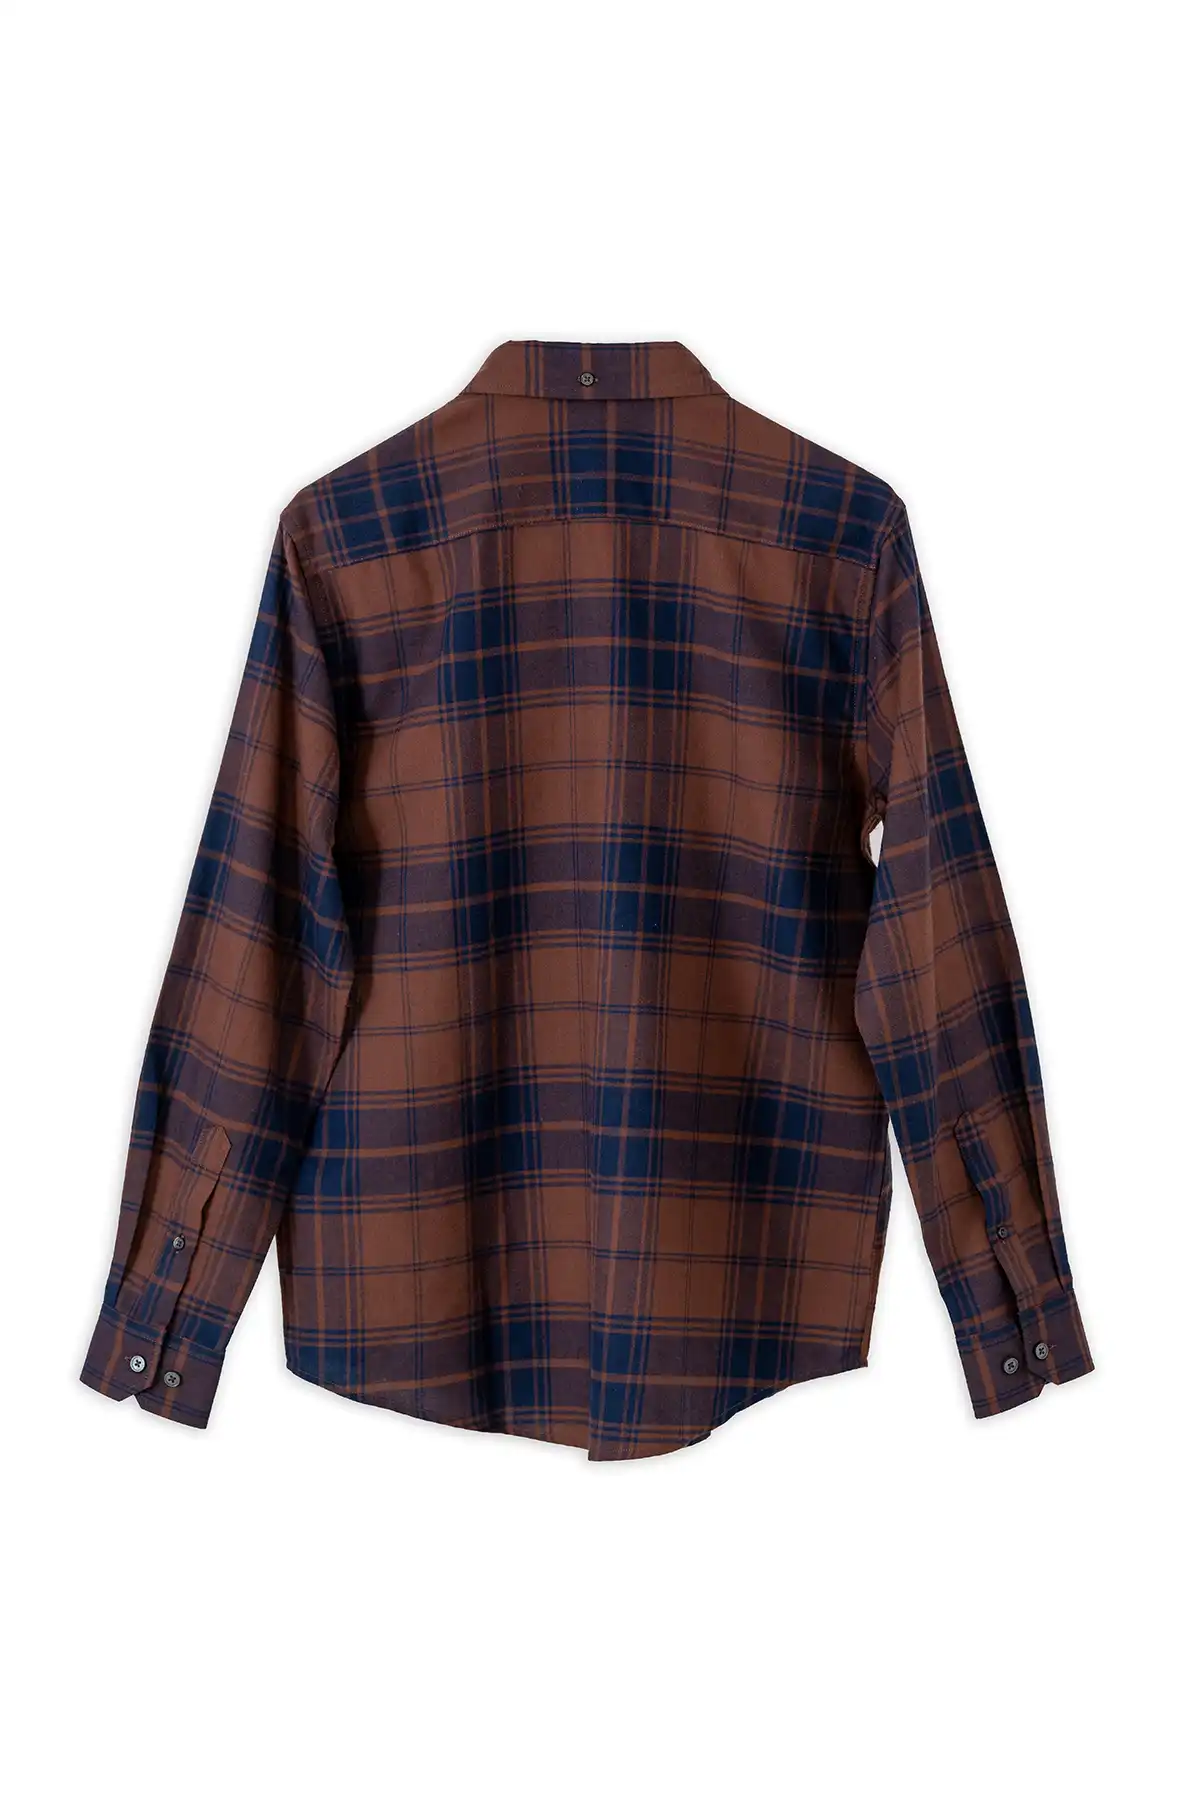 Checked Flannel Shirt - Brown/Navy Blue Check